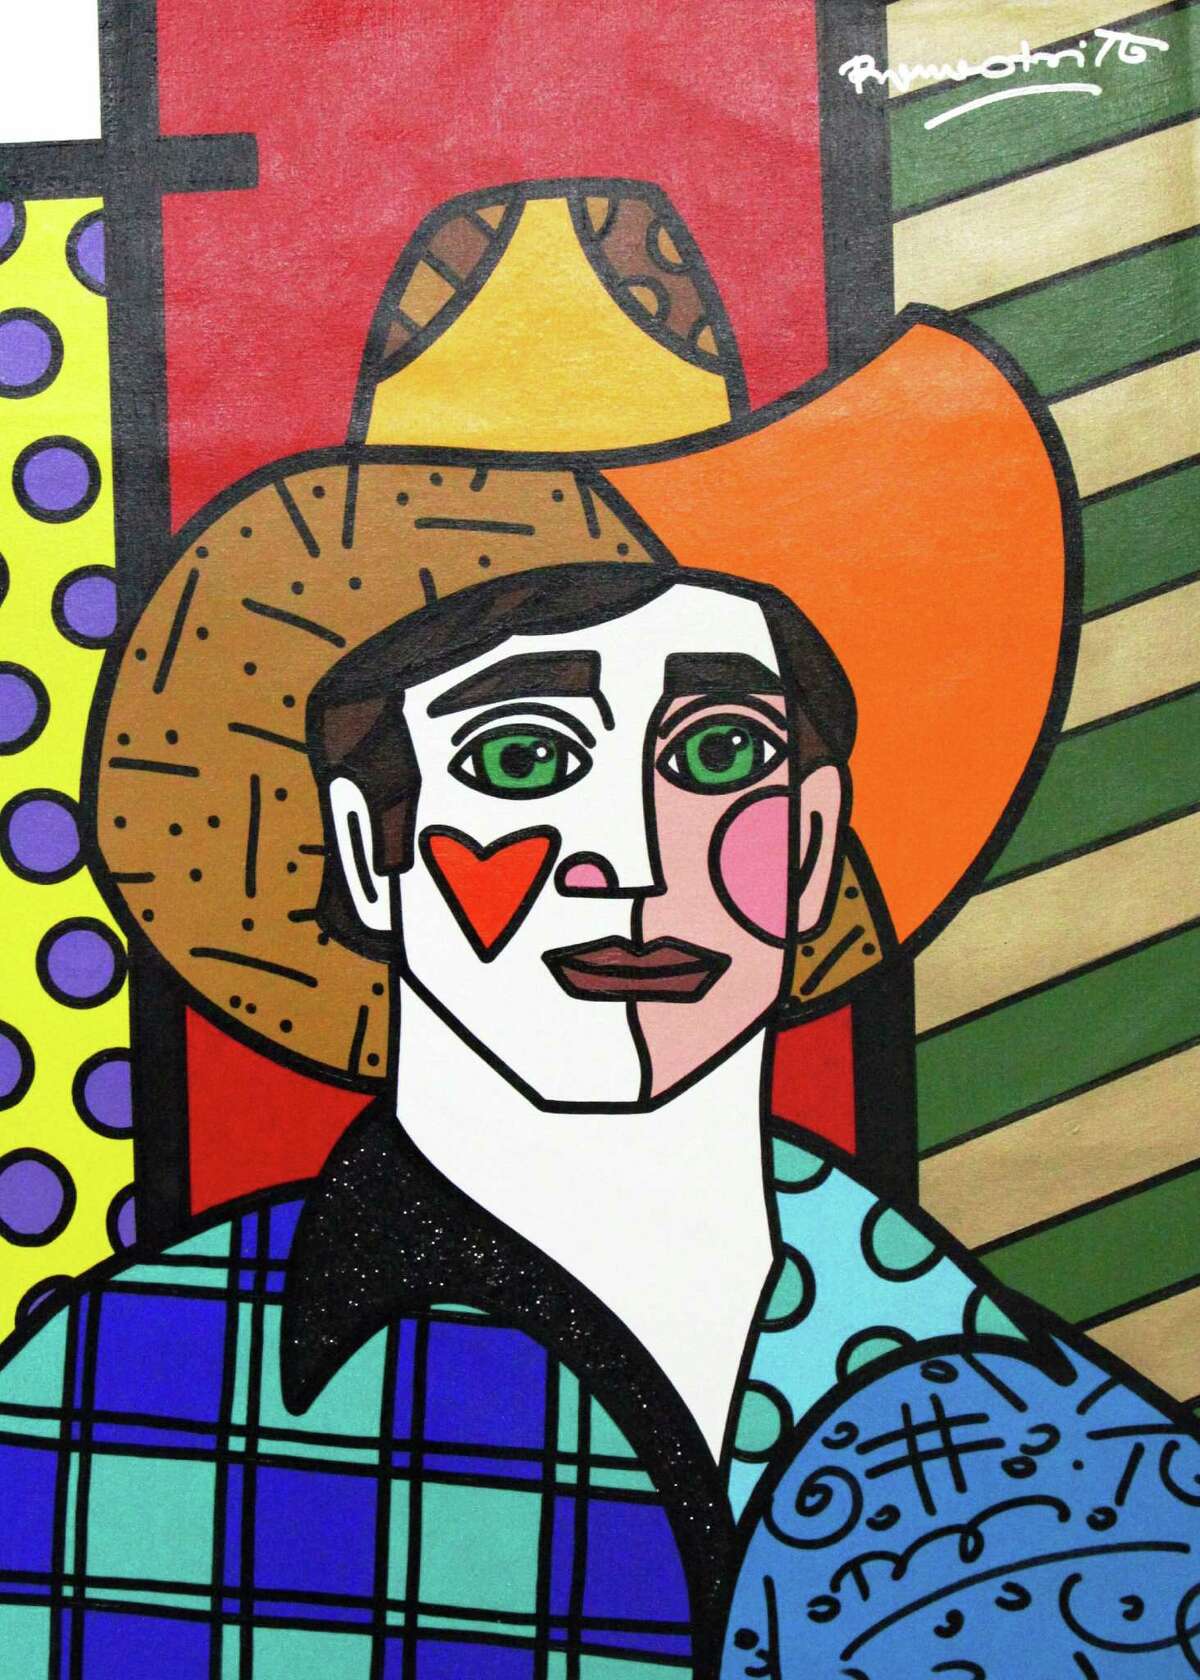 One of two paintings Romero Britto created with his Houston visit in mind. The celebrity artist visits Off the Wall Gallery Jan. 20-22.